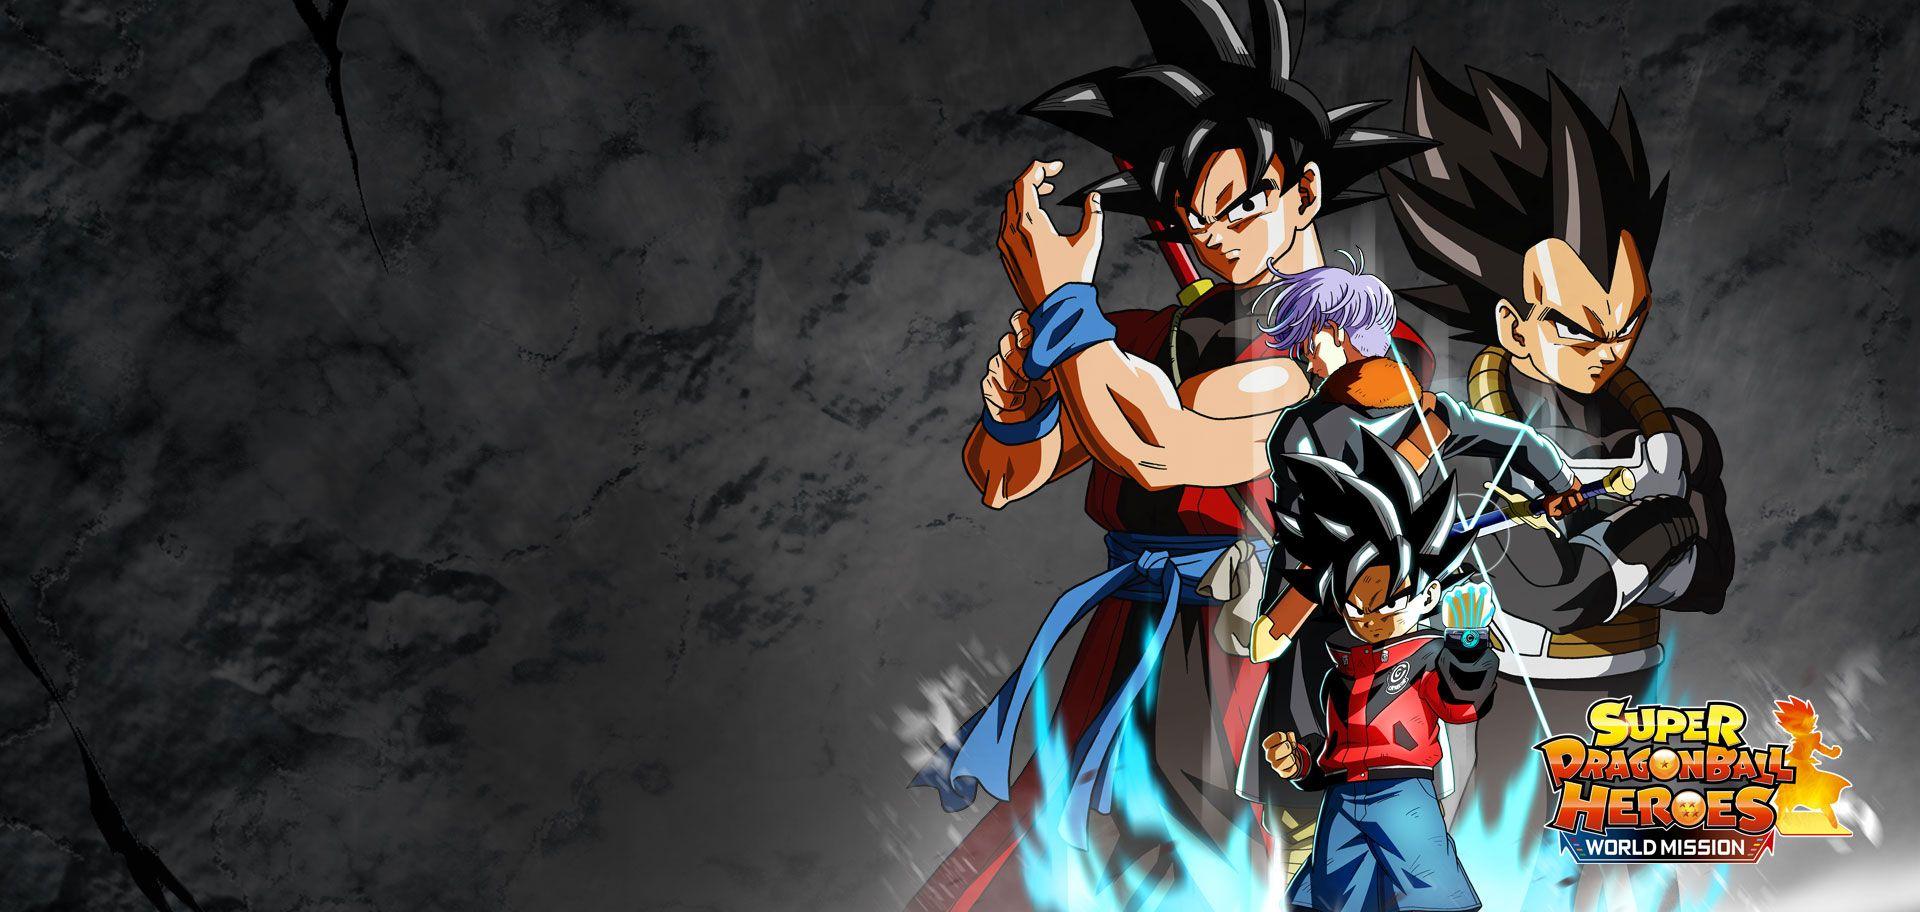 Super Dragon Ball Heroes Wallpapers - Top Free Super Dragon Ball Heroes Backgrounds ...